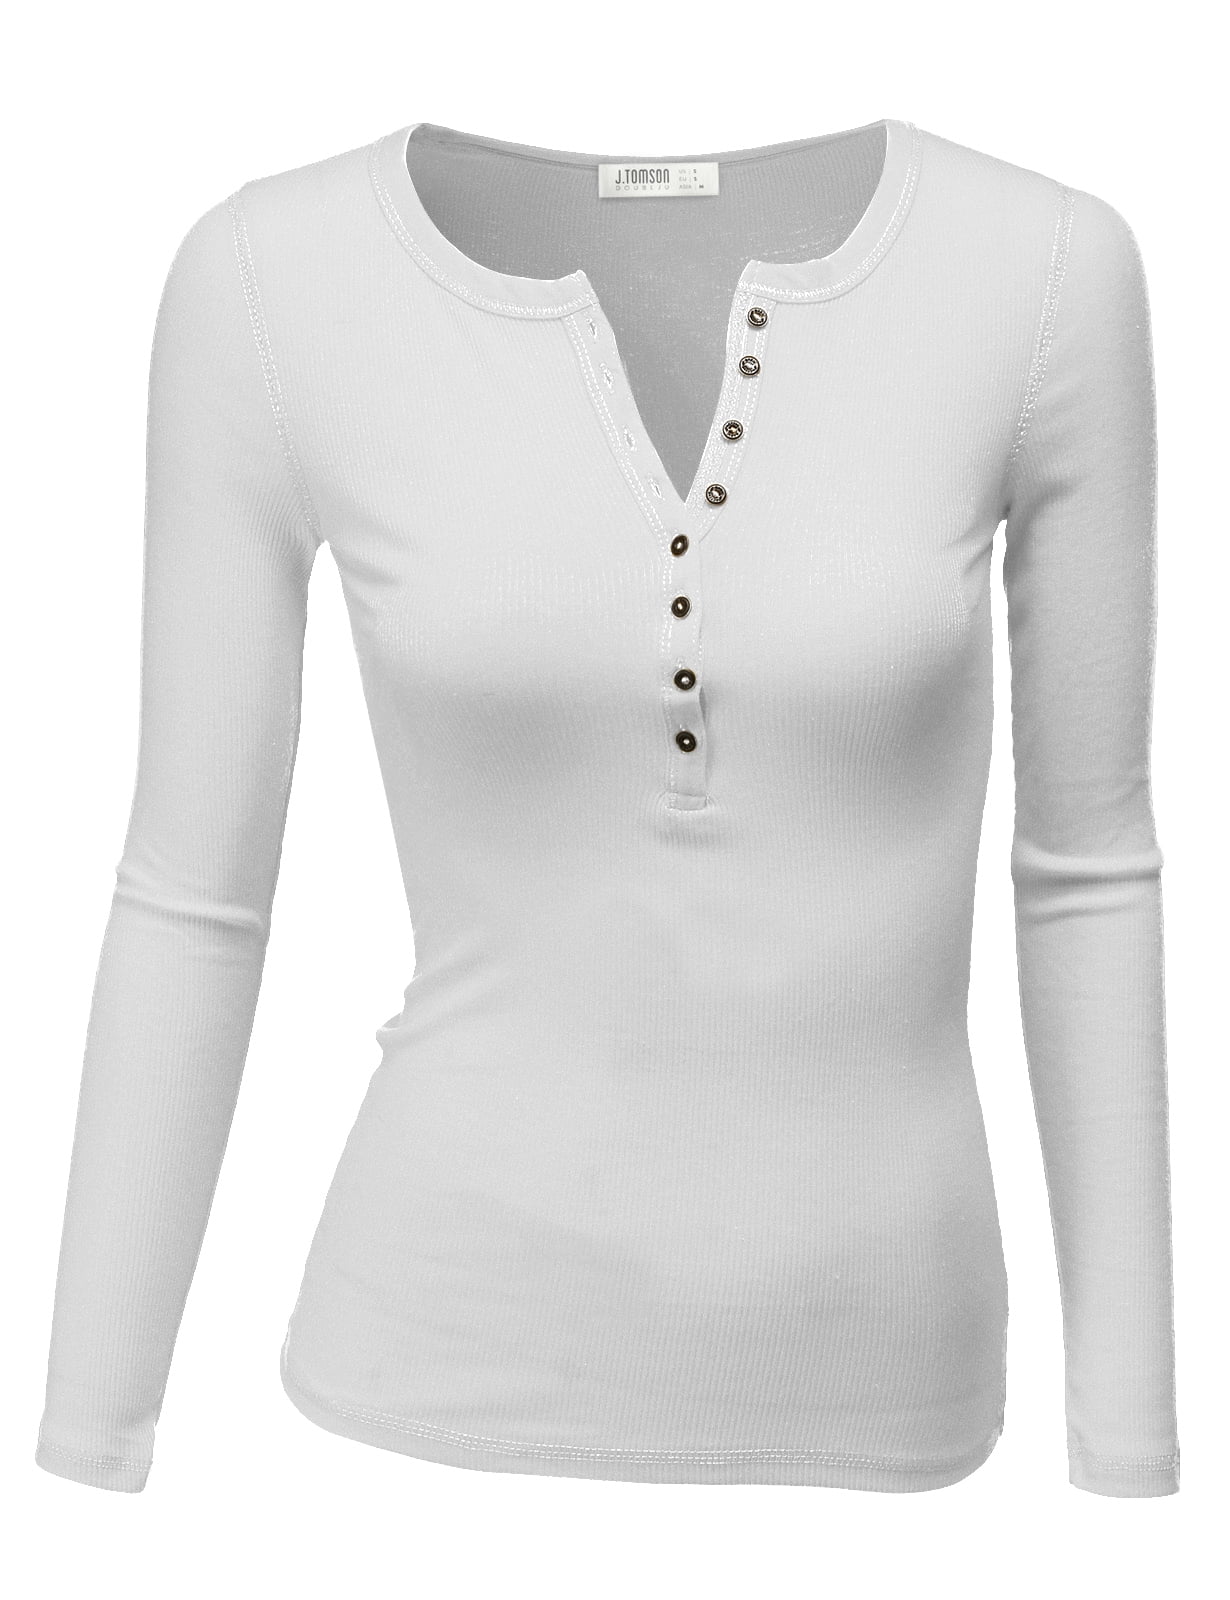 Doublju Womens Long Sleeve Thermal Henley Top with Female Plus Size ...